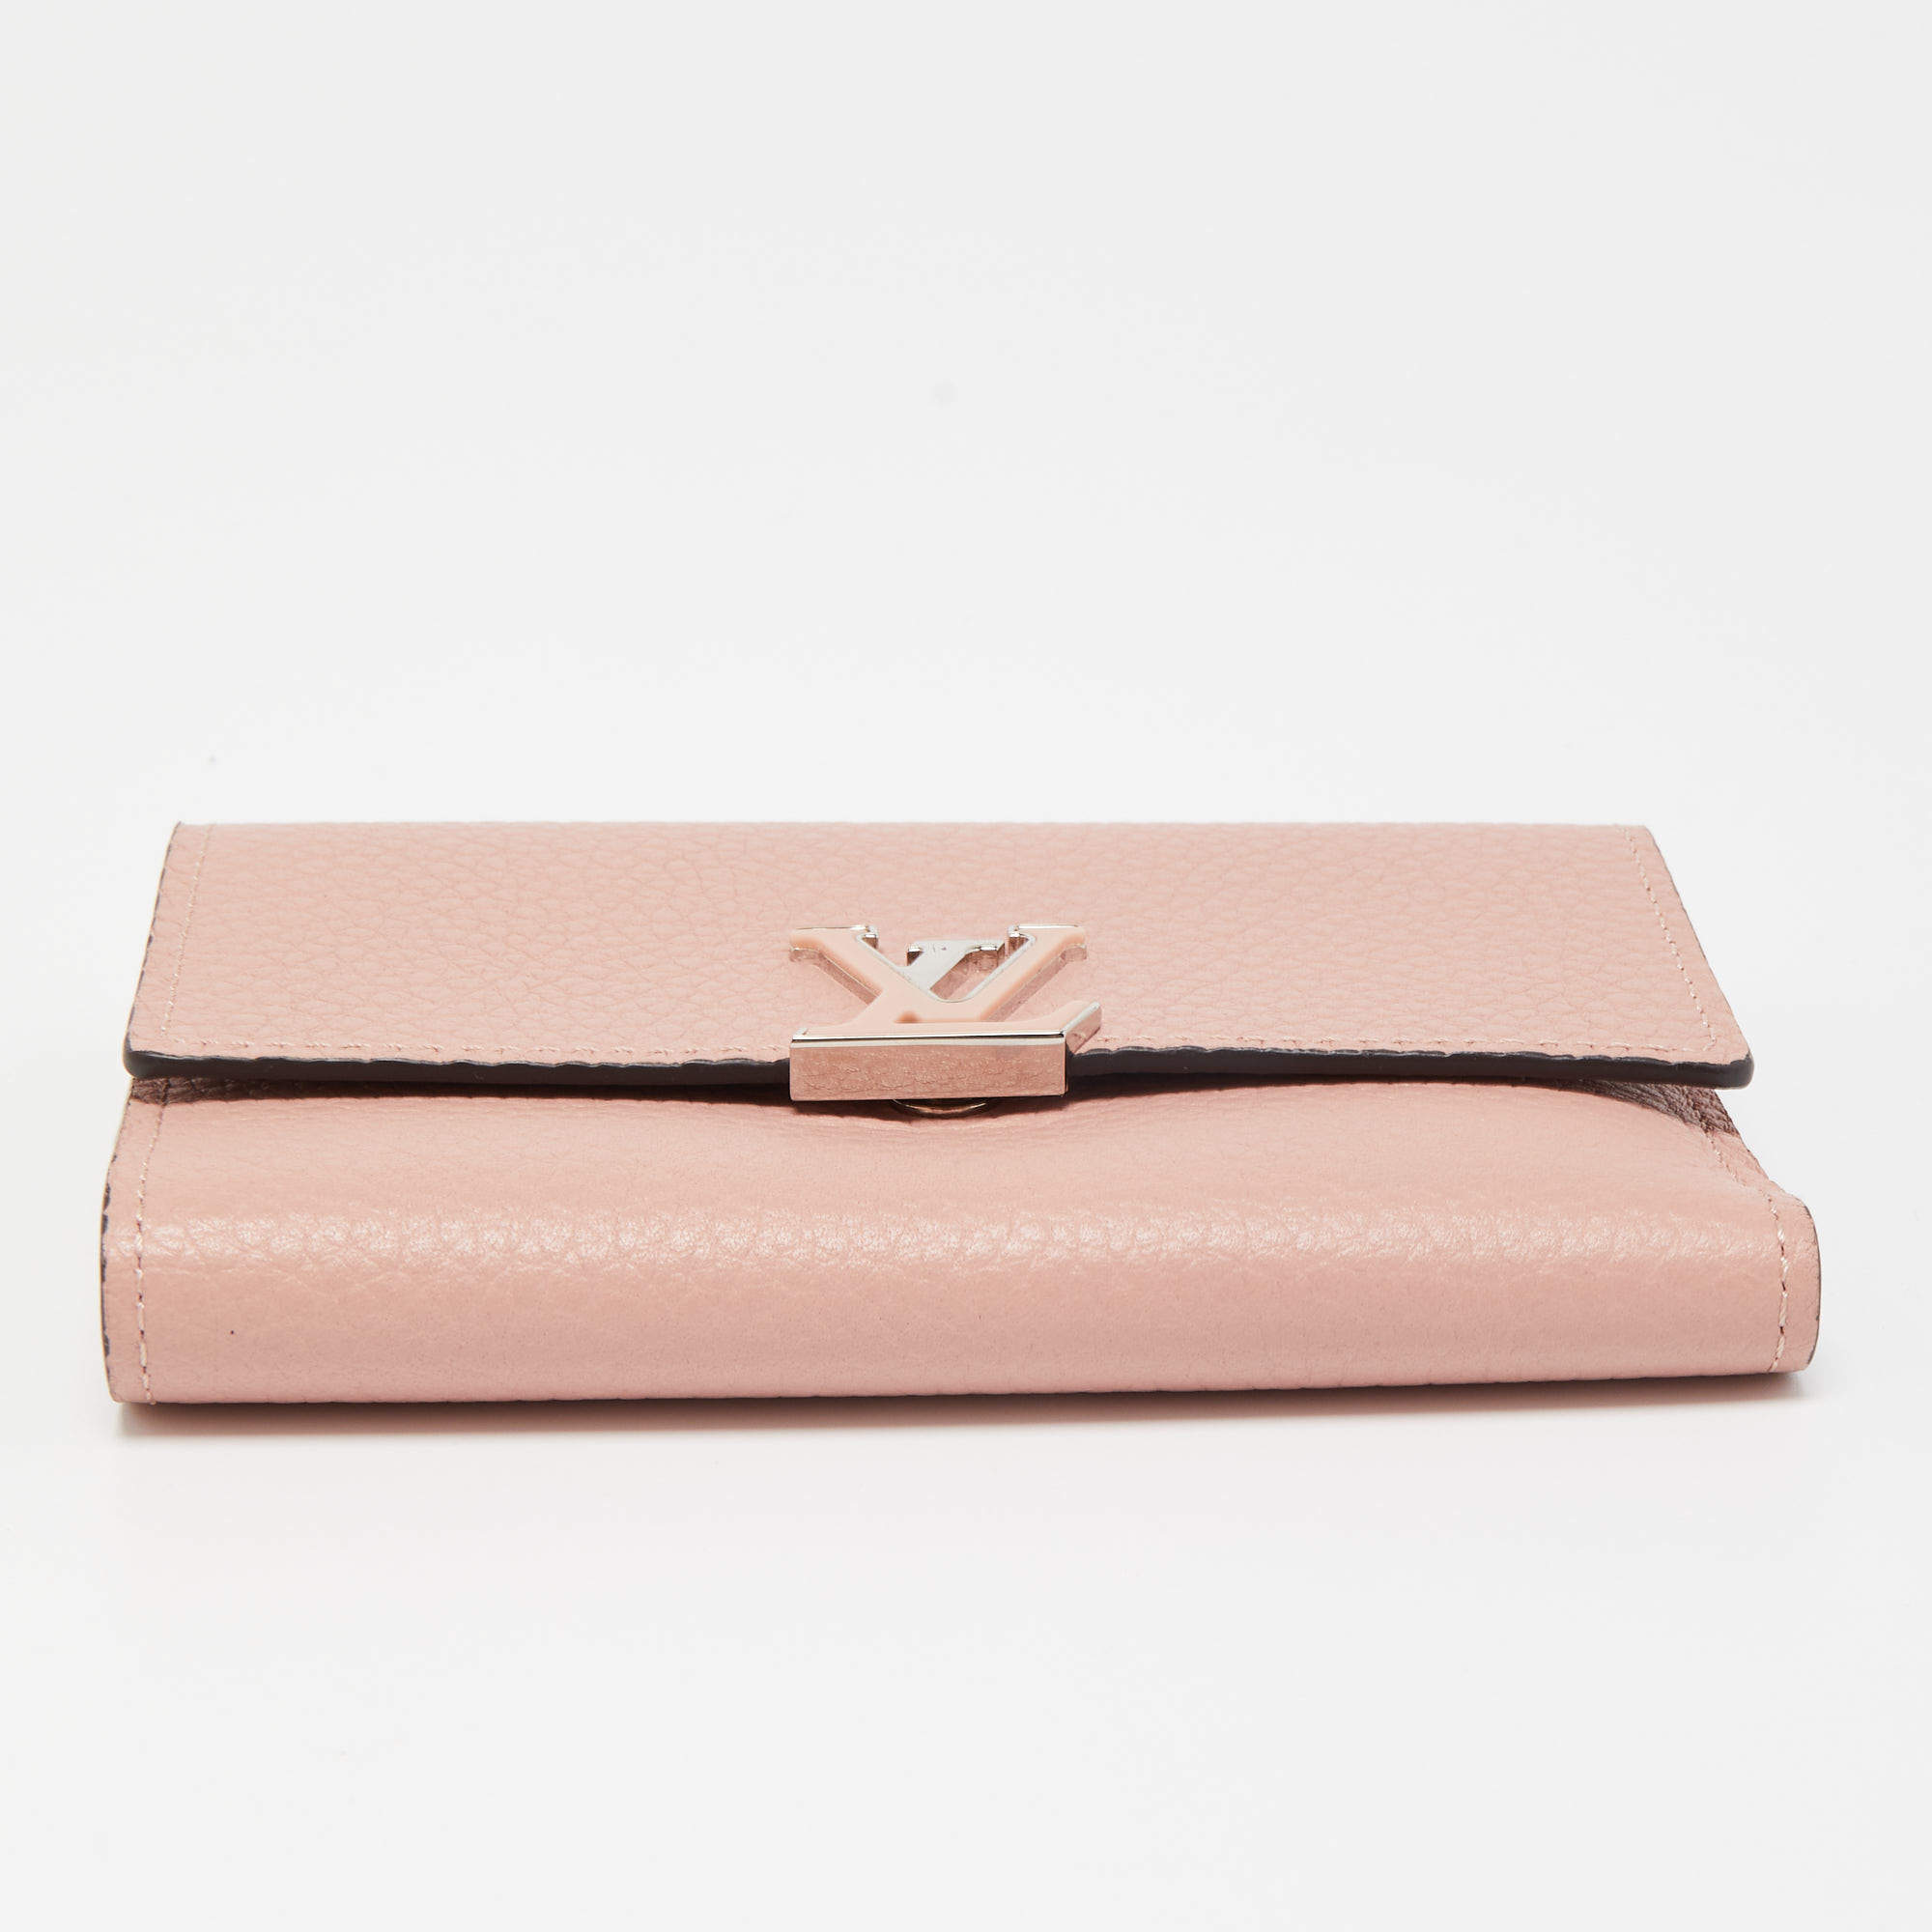 Capucines Compact Maxi Wallet Capucines - Wallets and Small Leather Goods